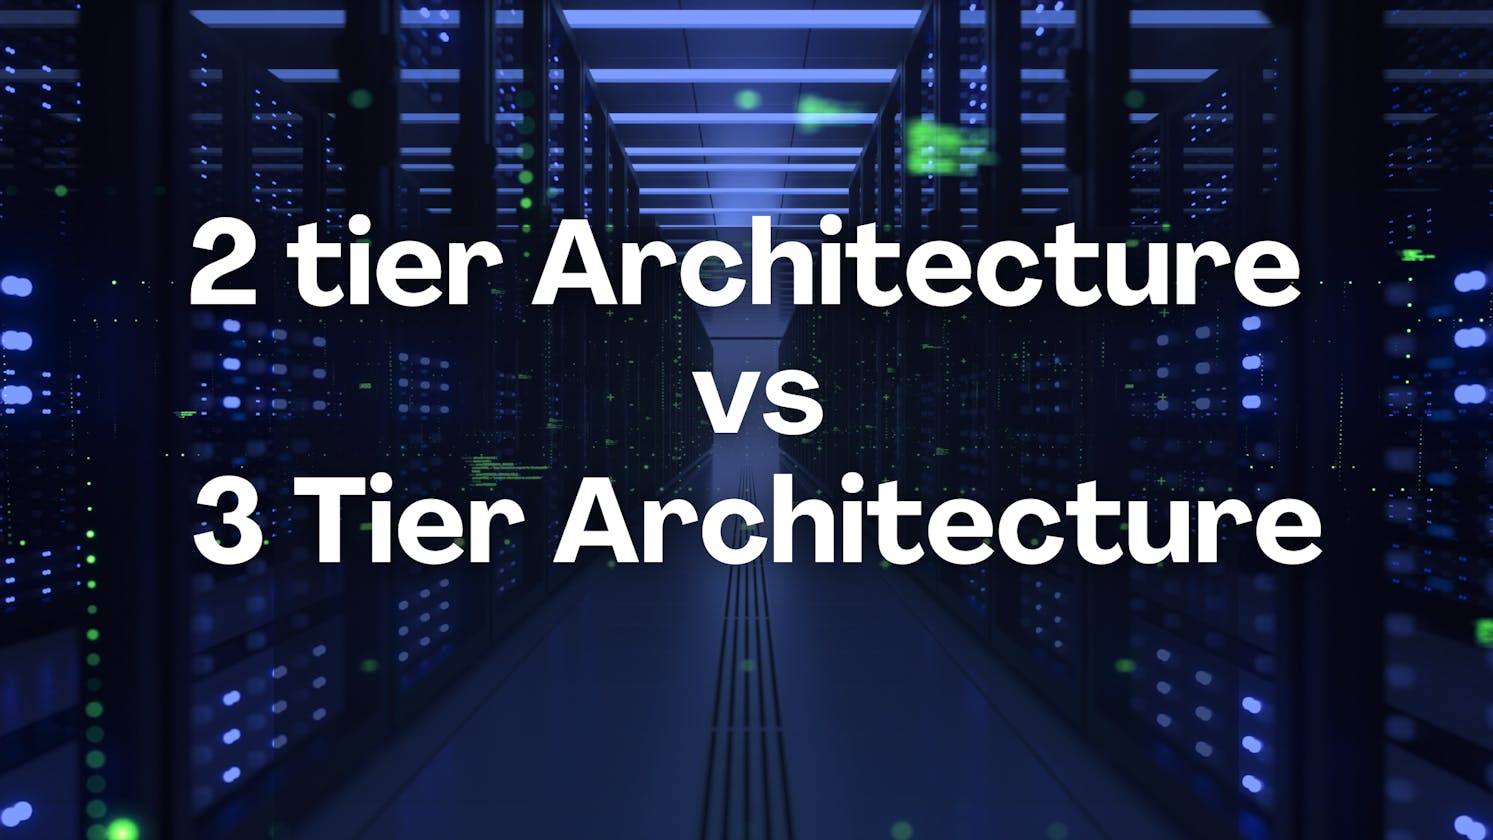 2 Tier Architecture in DBMS, Database Management System